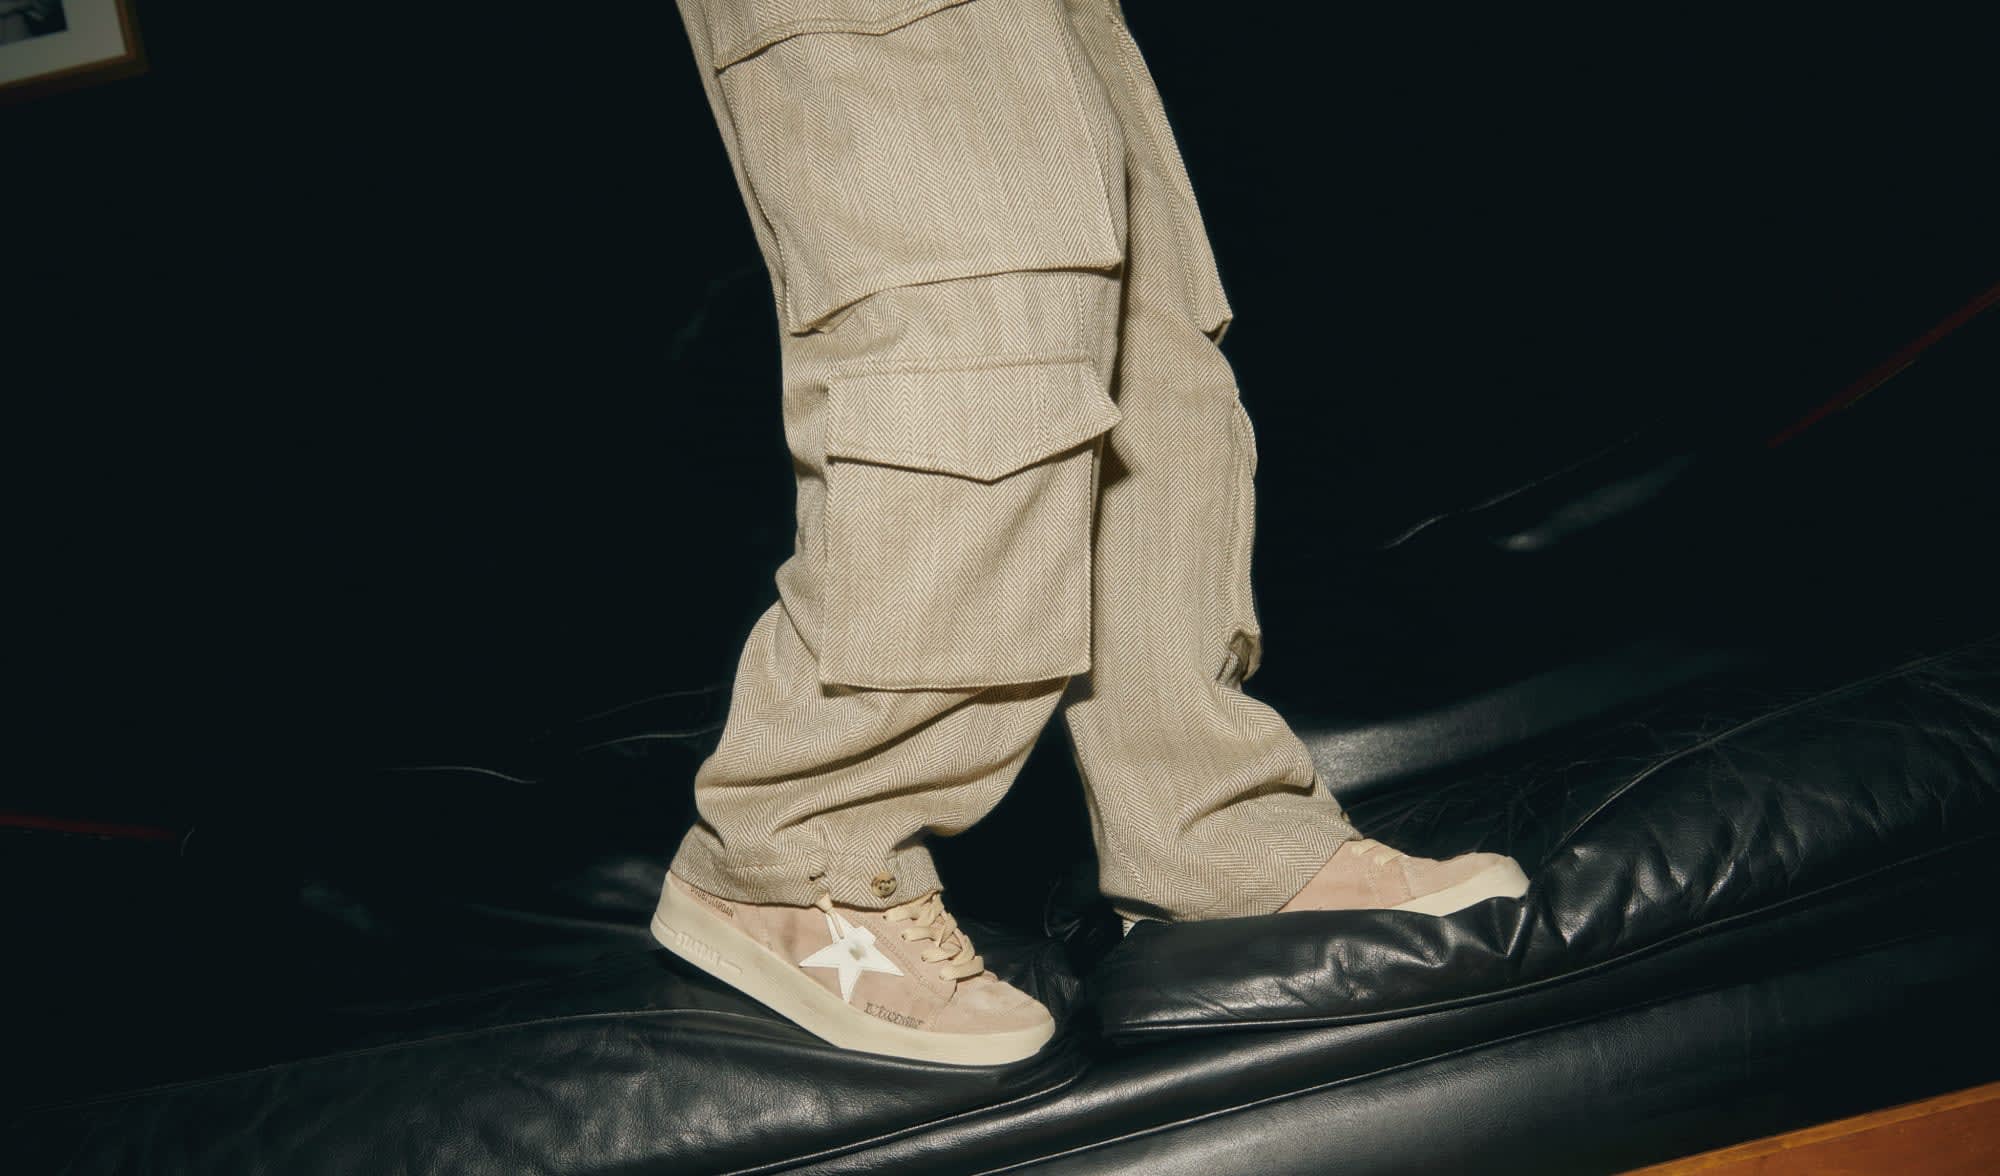 beige-cargo-pants-and-beige-stardan-sneakers-standing-on-black-leather-sofa